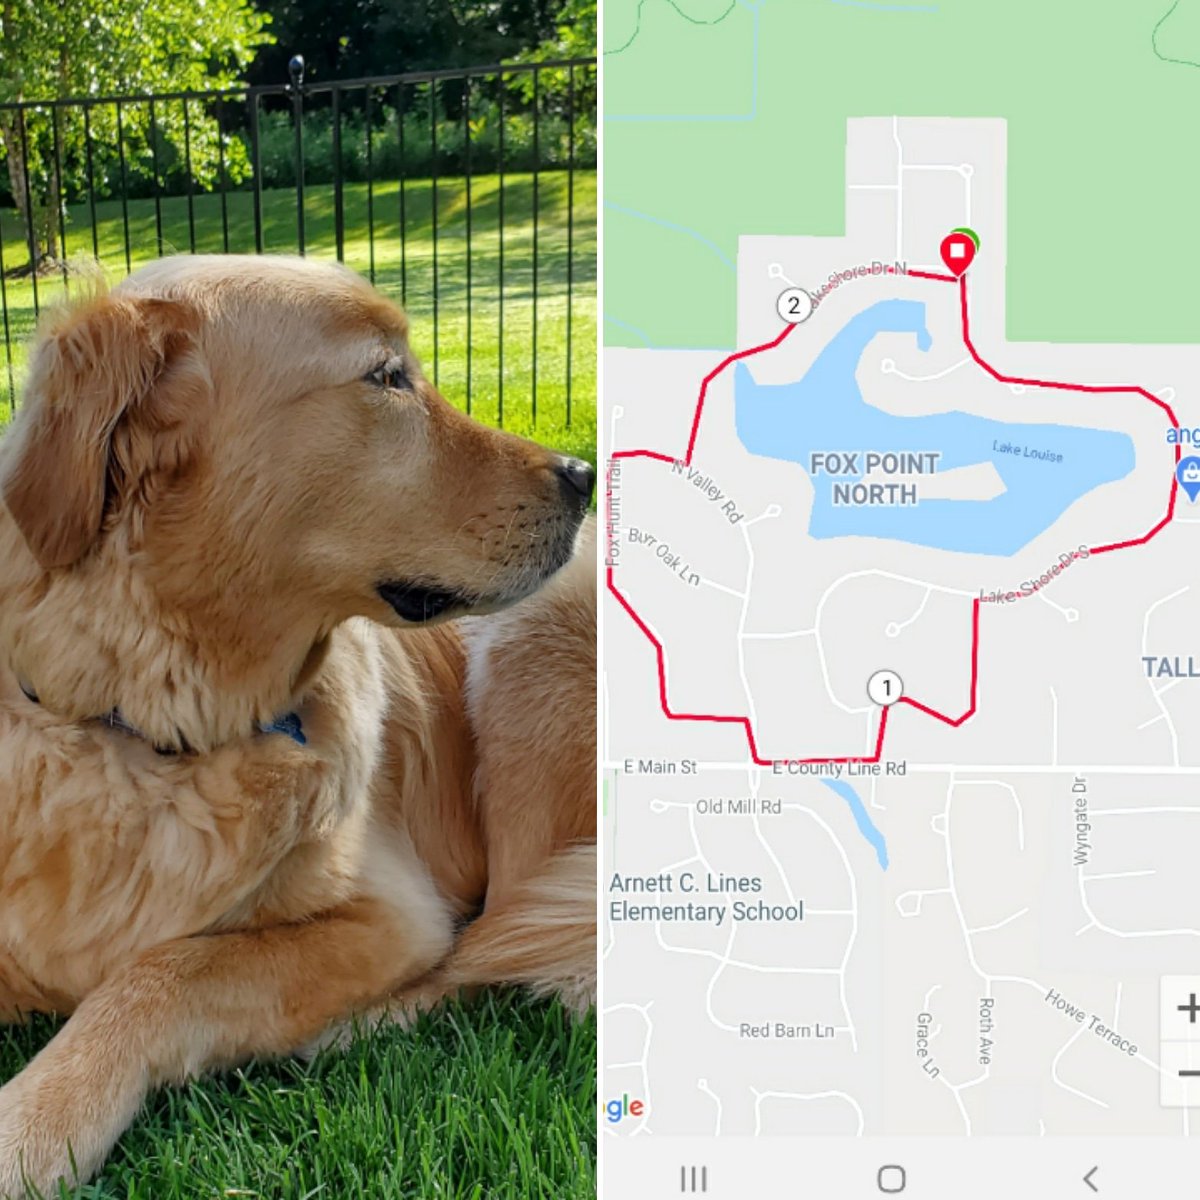 My attempt at a profile portrait of my faithful running buddy.  Do you see the resemblance? #GoldenRetrievers #runningwithdogs